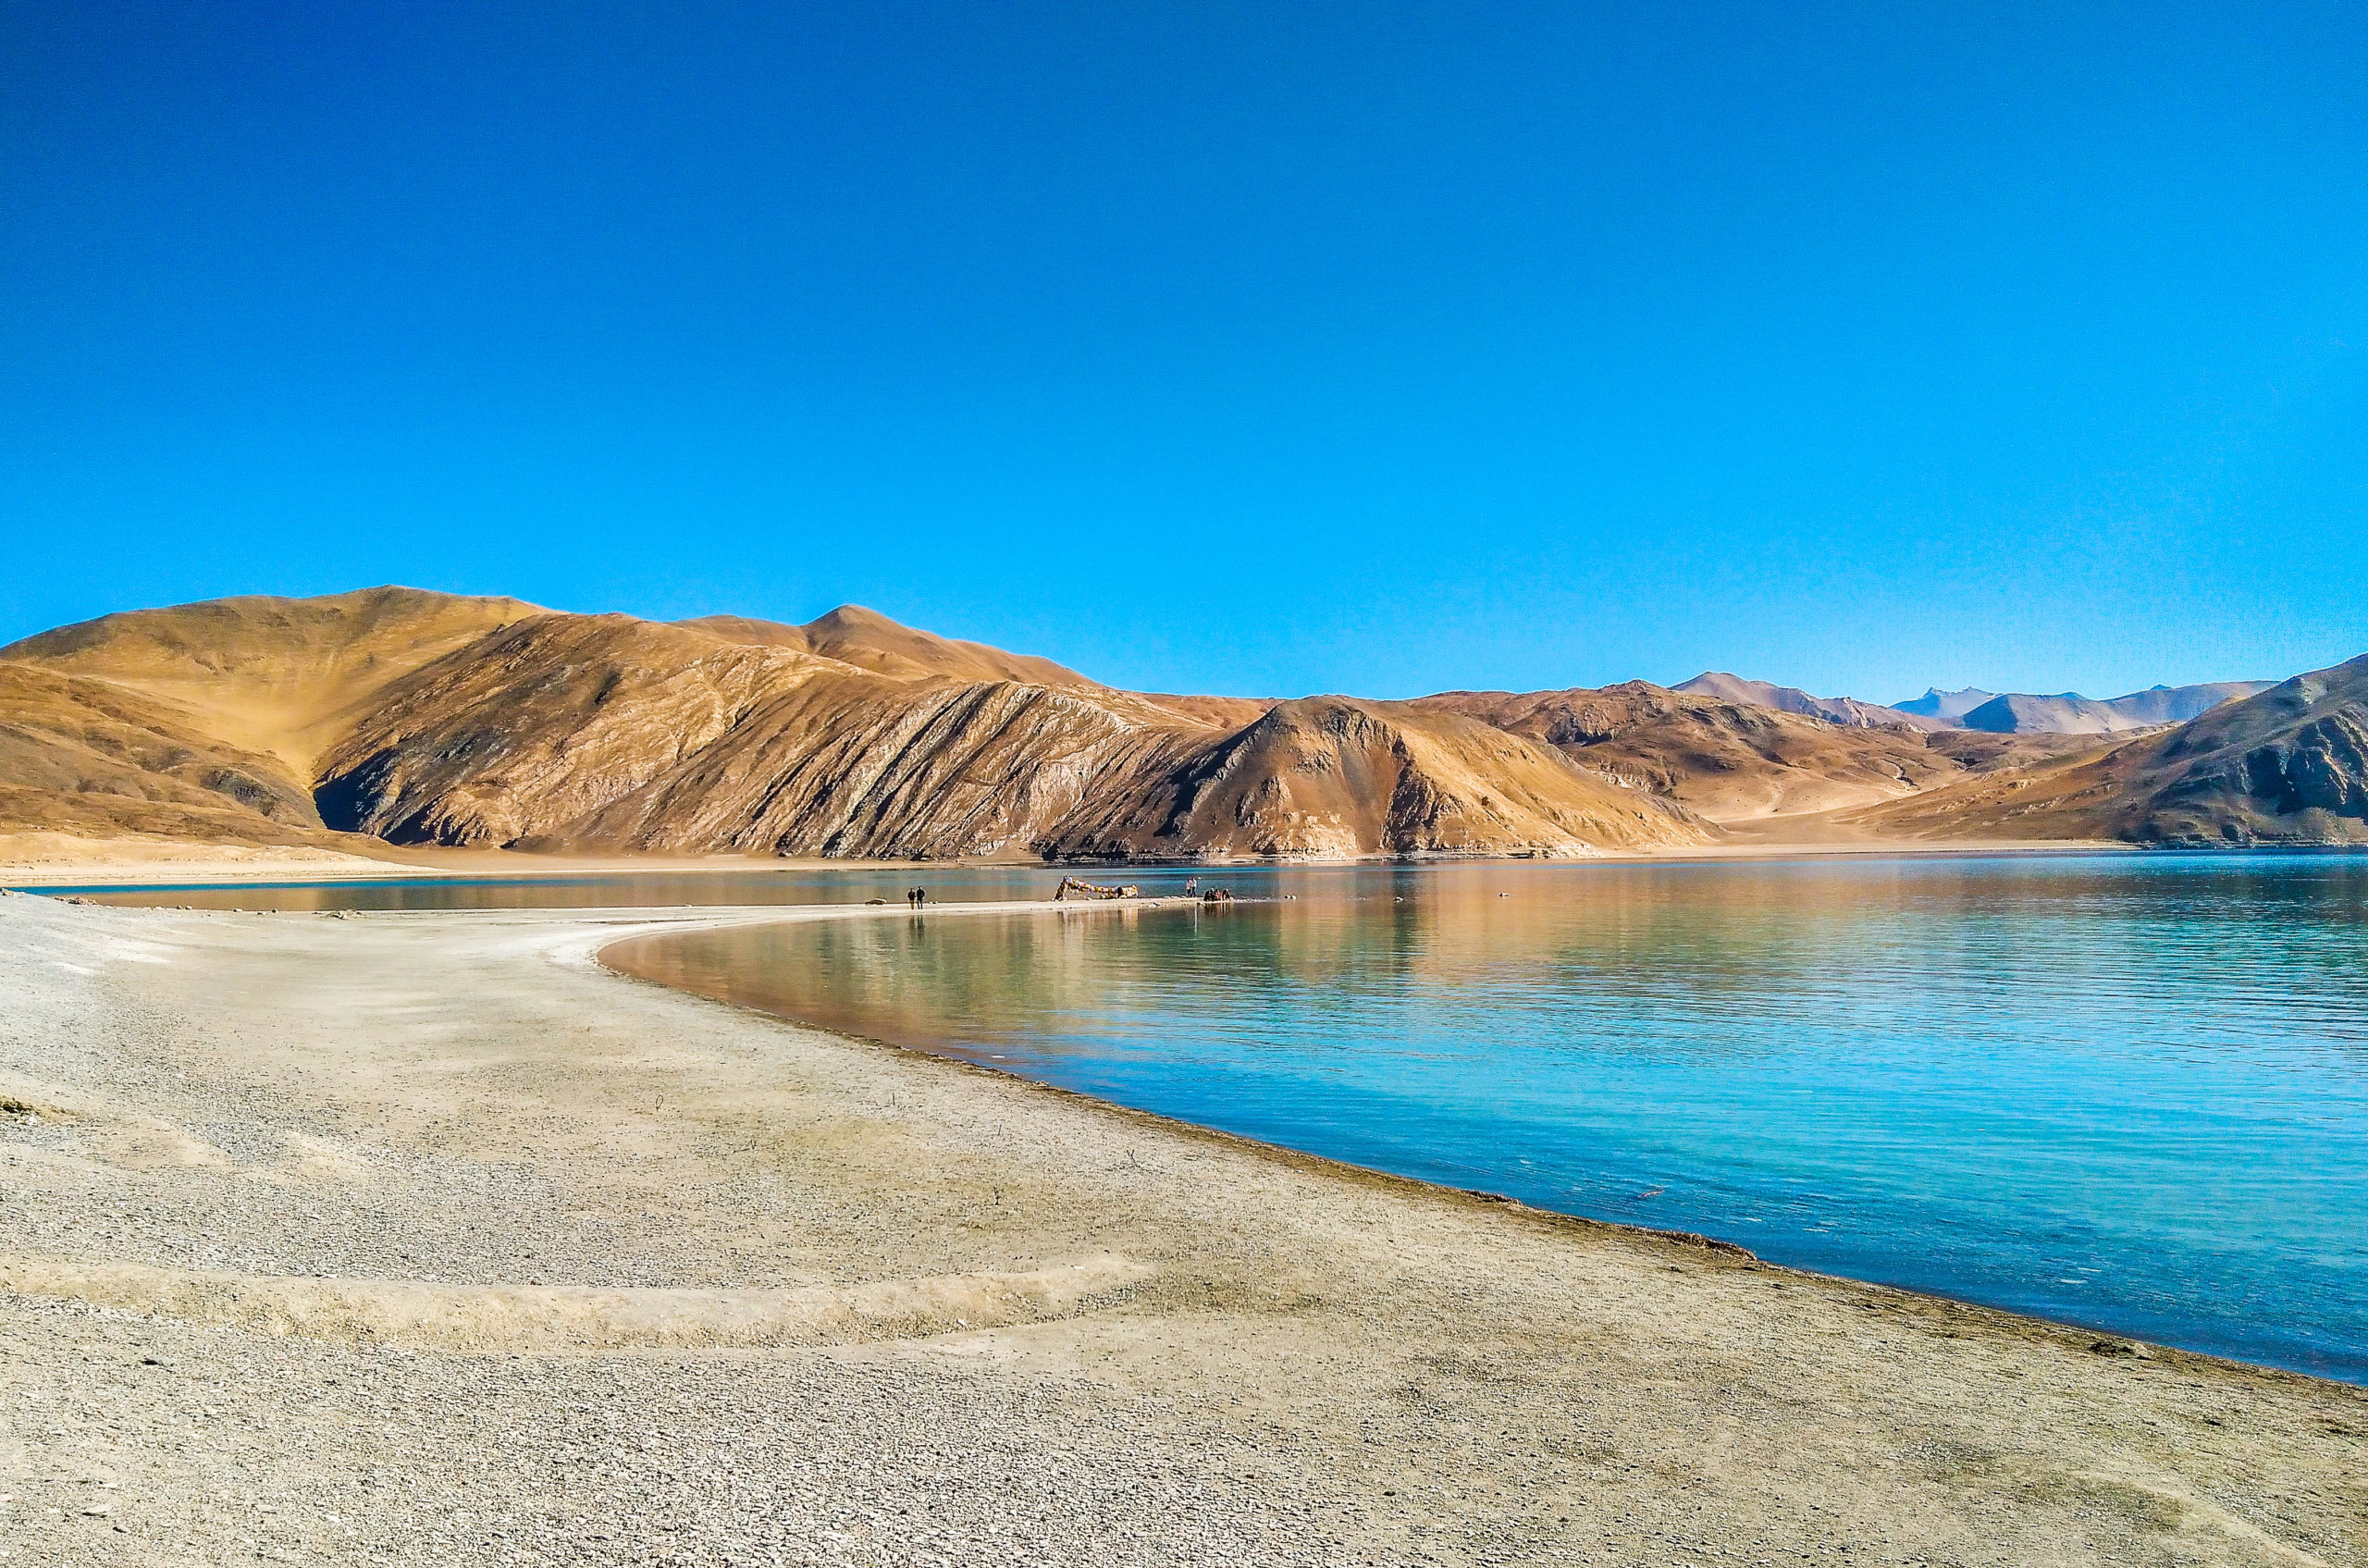 A peek in the landscapes of Ladakh